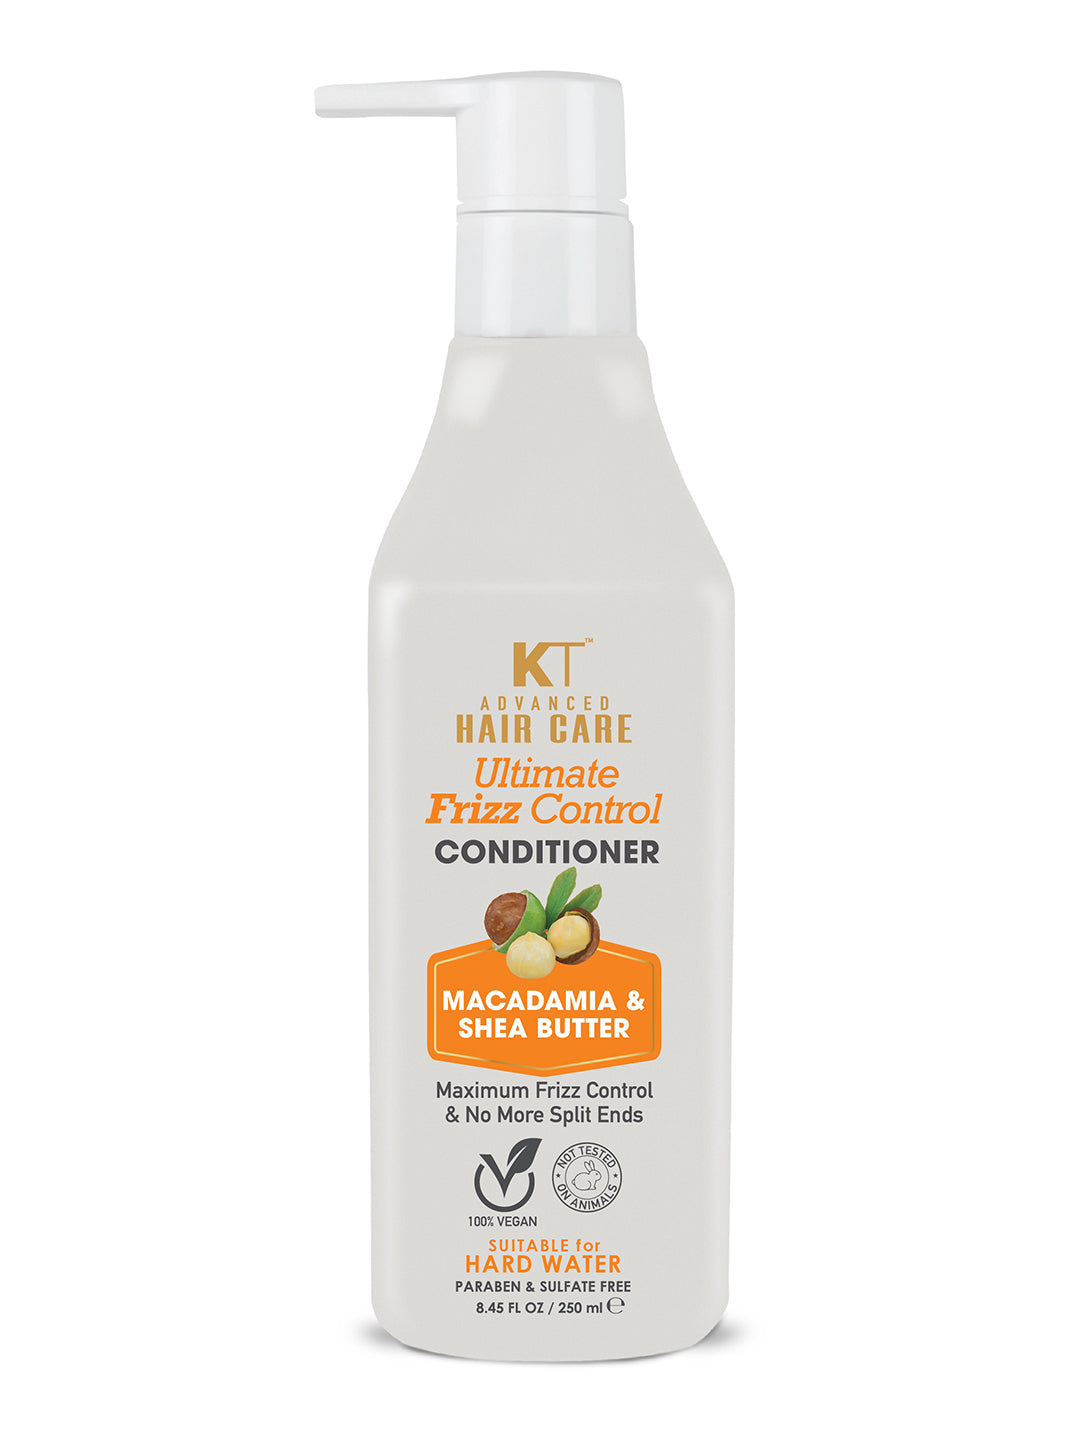 KT ADVANCED HAIR CARE ULTIMATE FRIZZ CONTROL CONDITIONER 250 ml